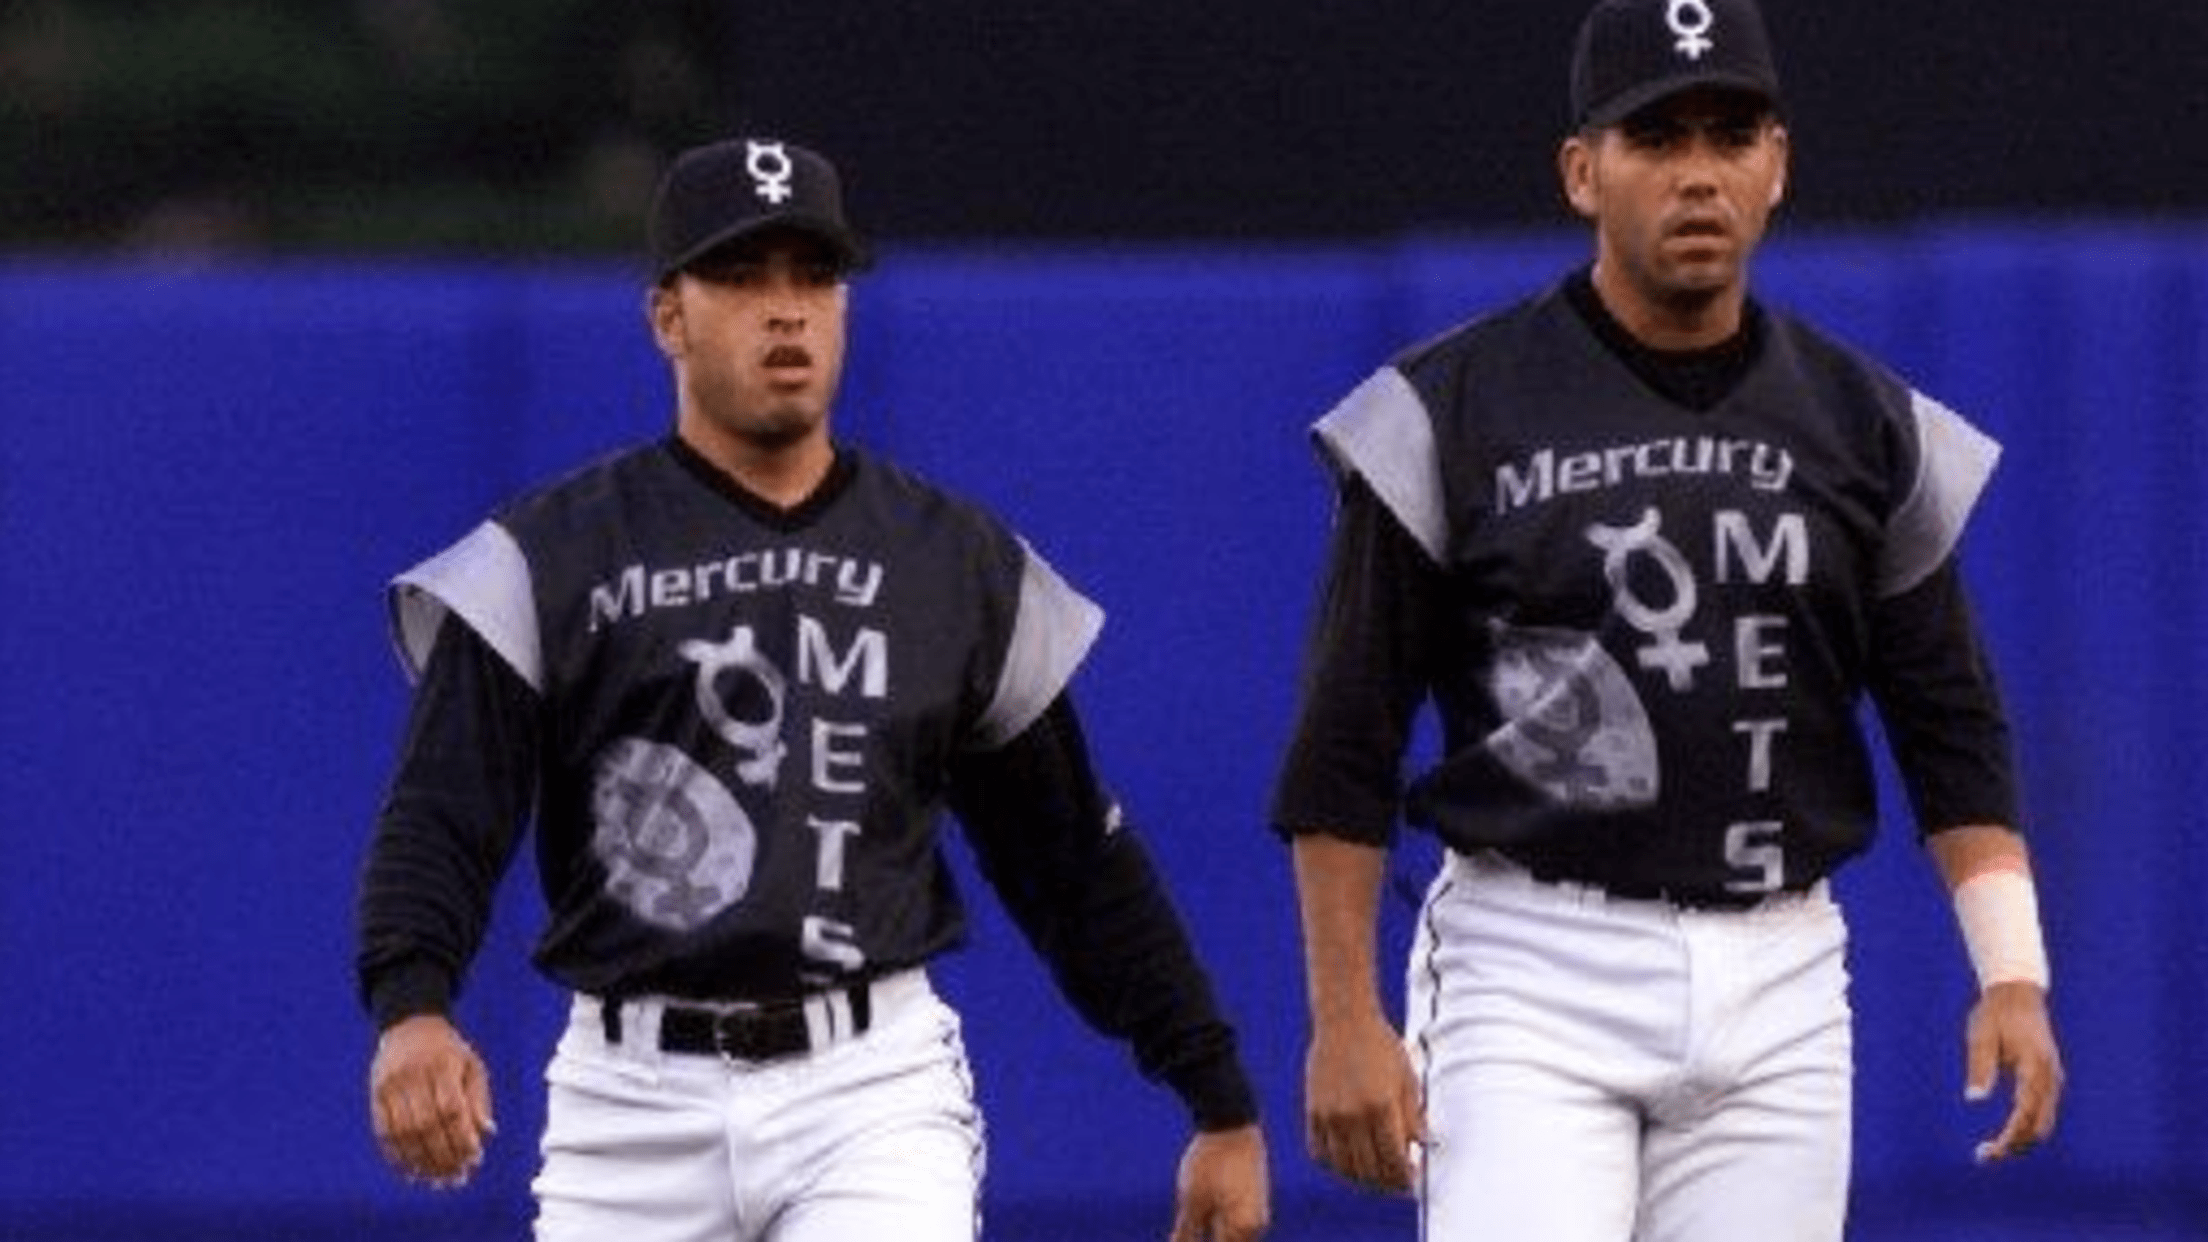 mlb back to the future uniforms